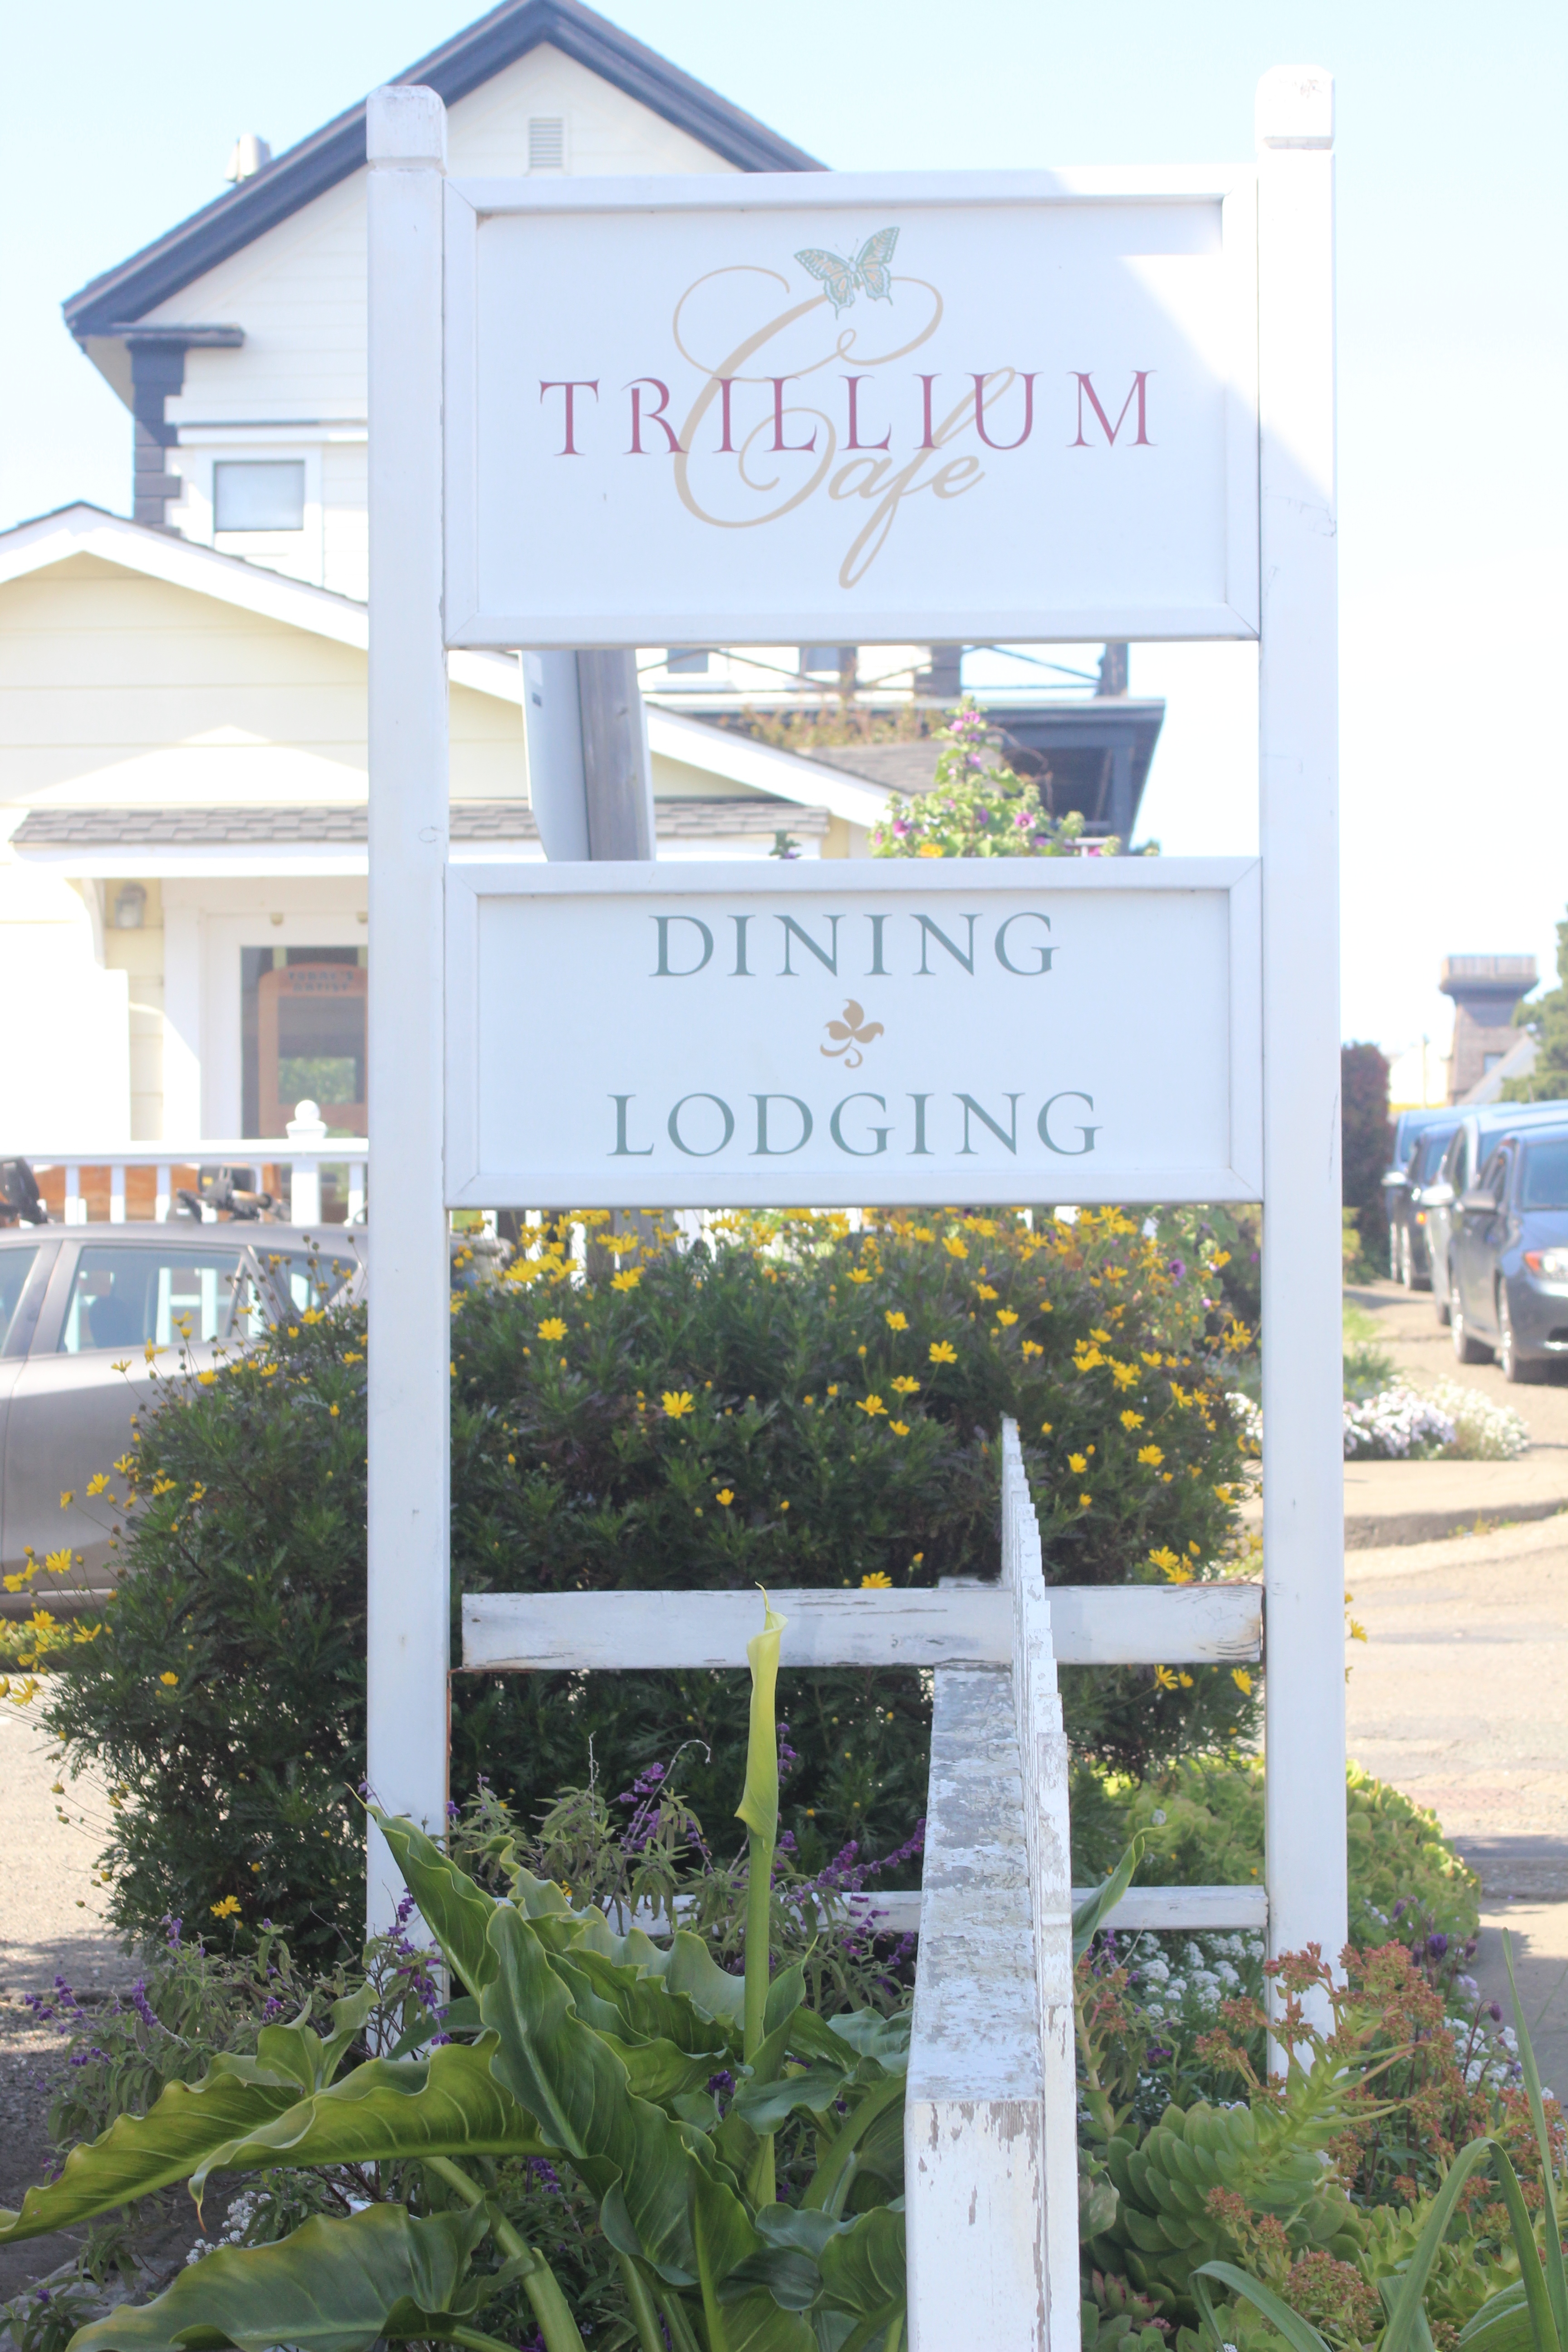 Trillium Cafe in Mendocino from the street